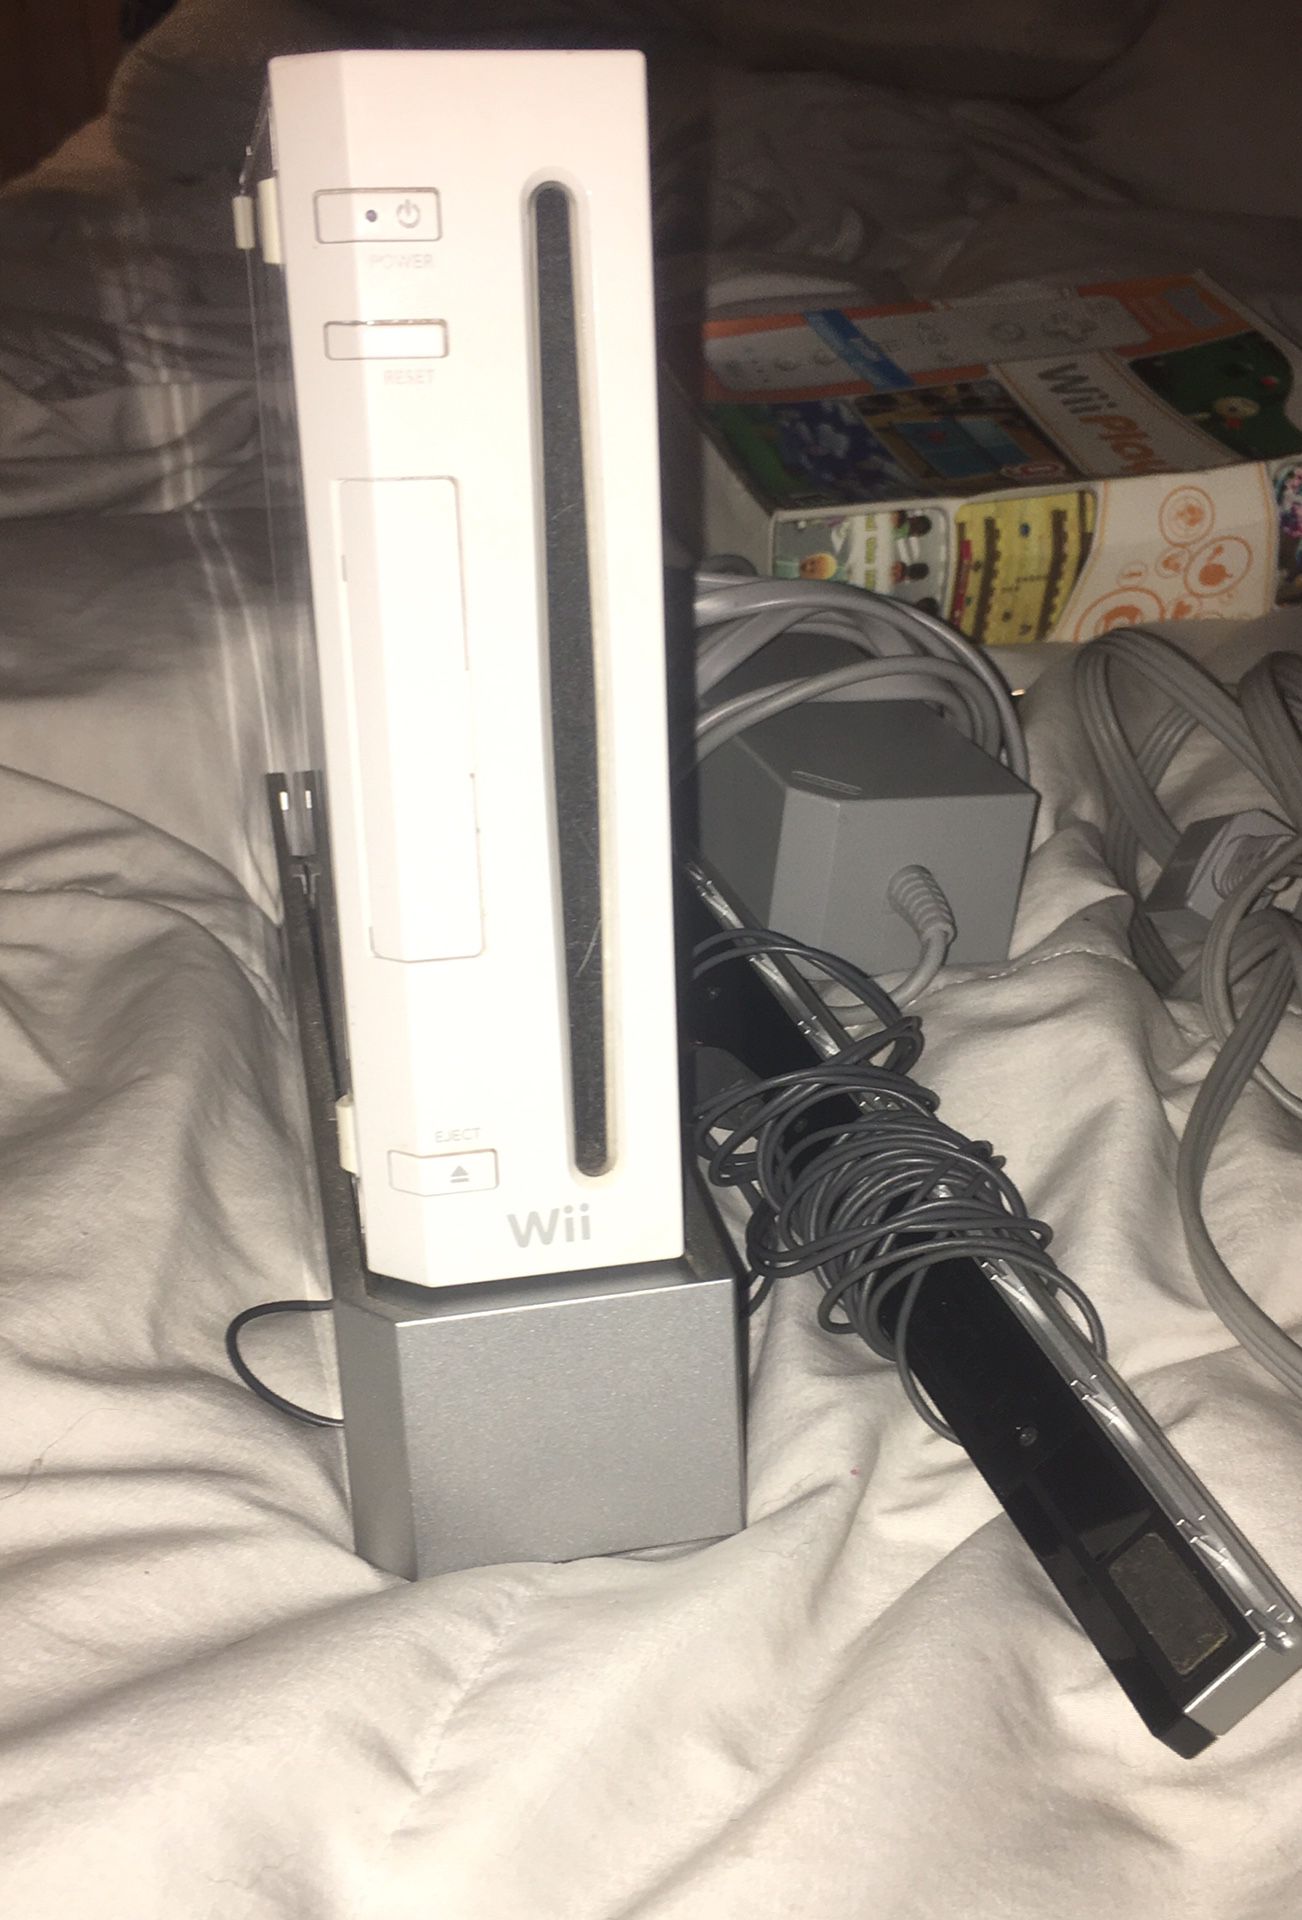 Wii Gaming Console, 3 remotes & 2 silicone cases, joystick, 1 game, all cords & attachments